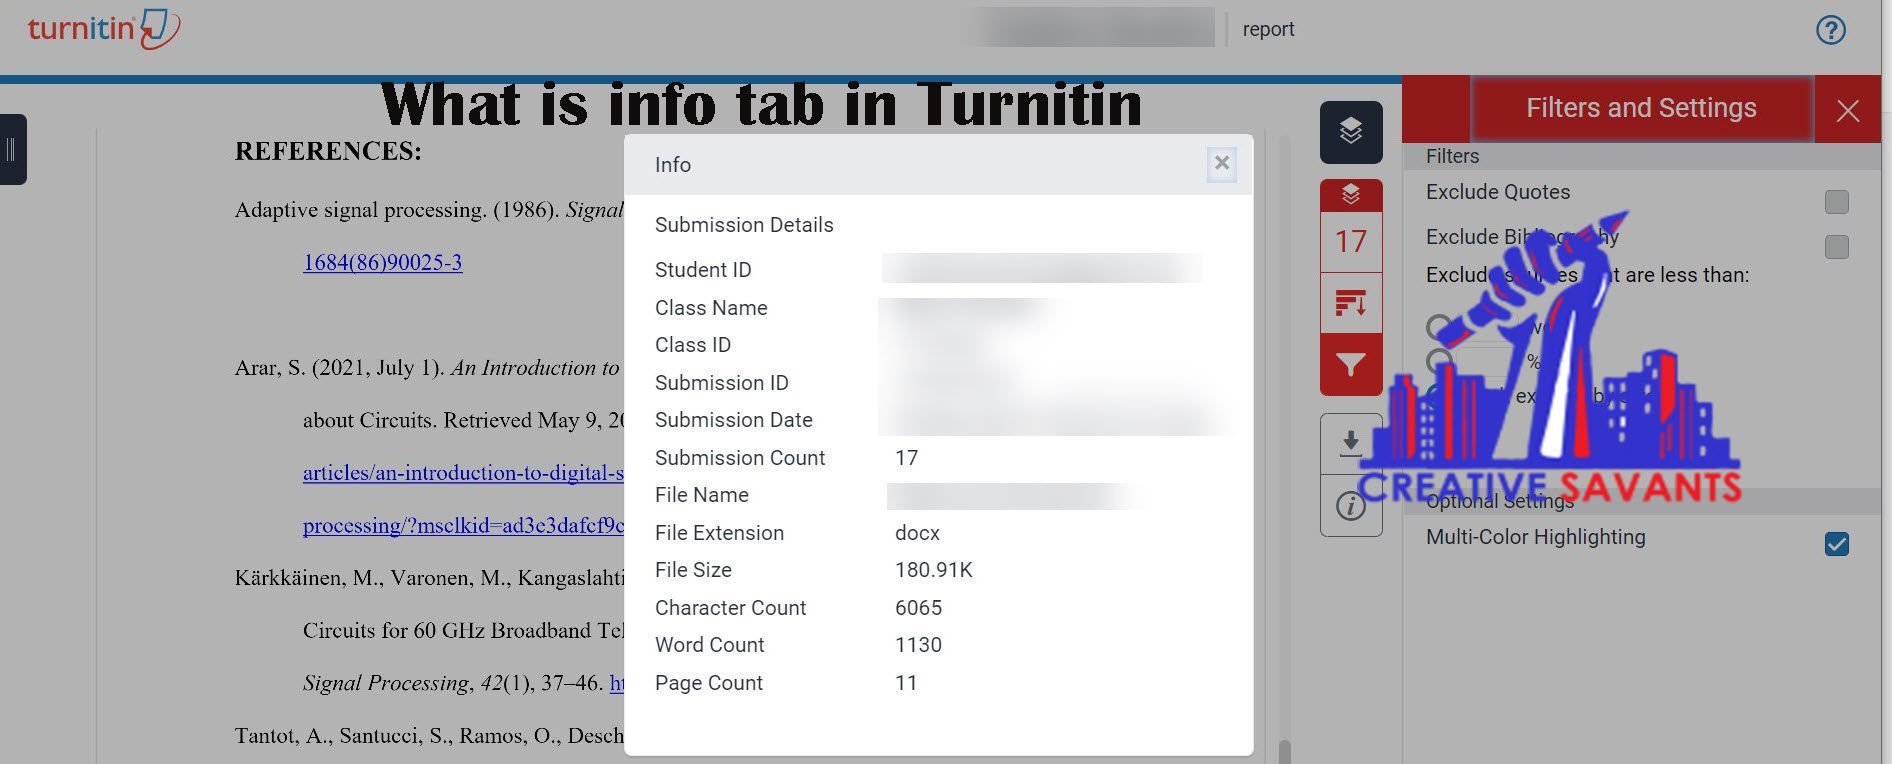 what is info tab in turnitin